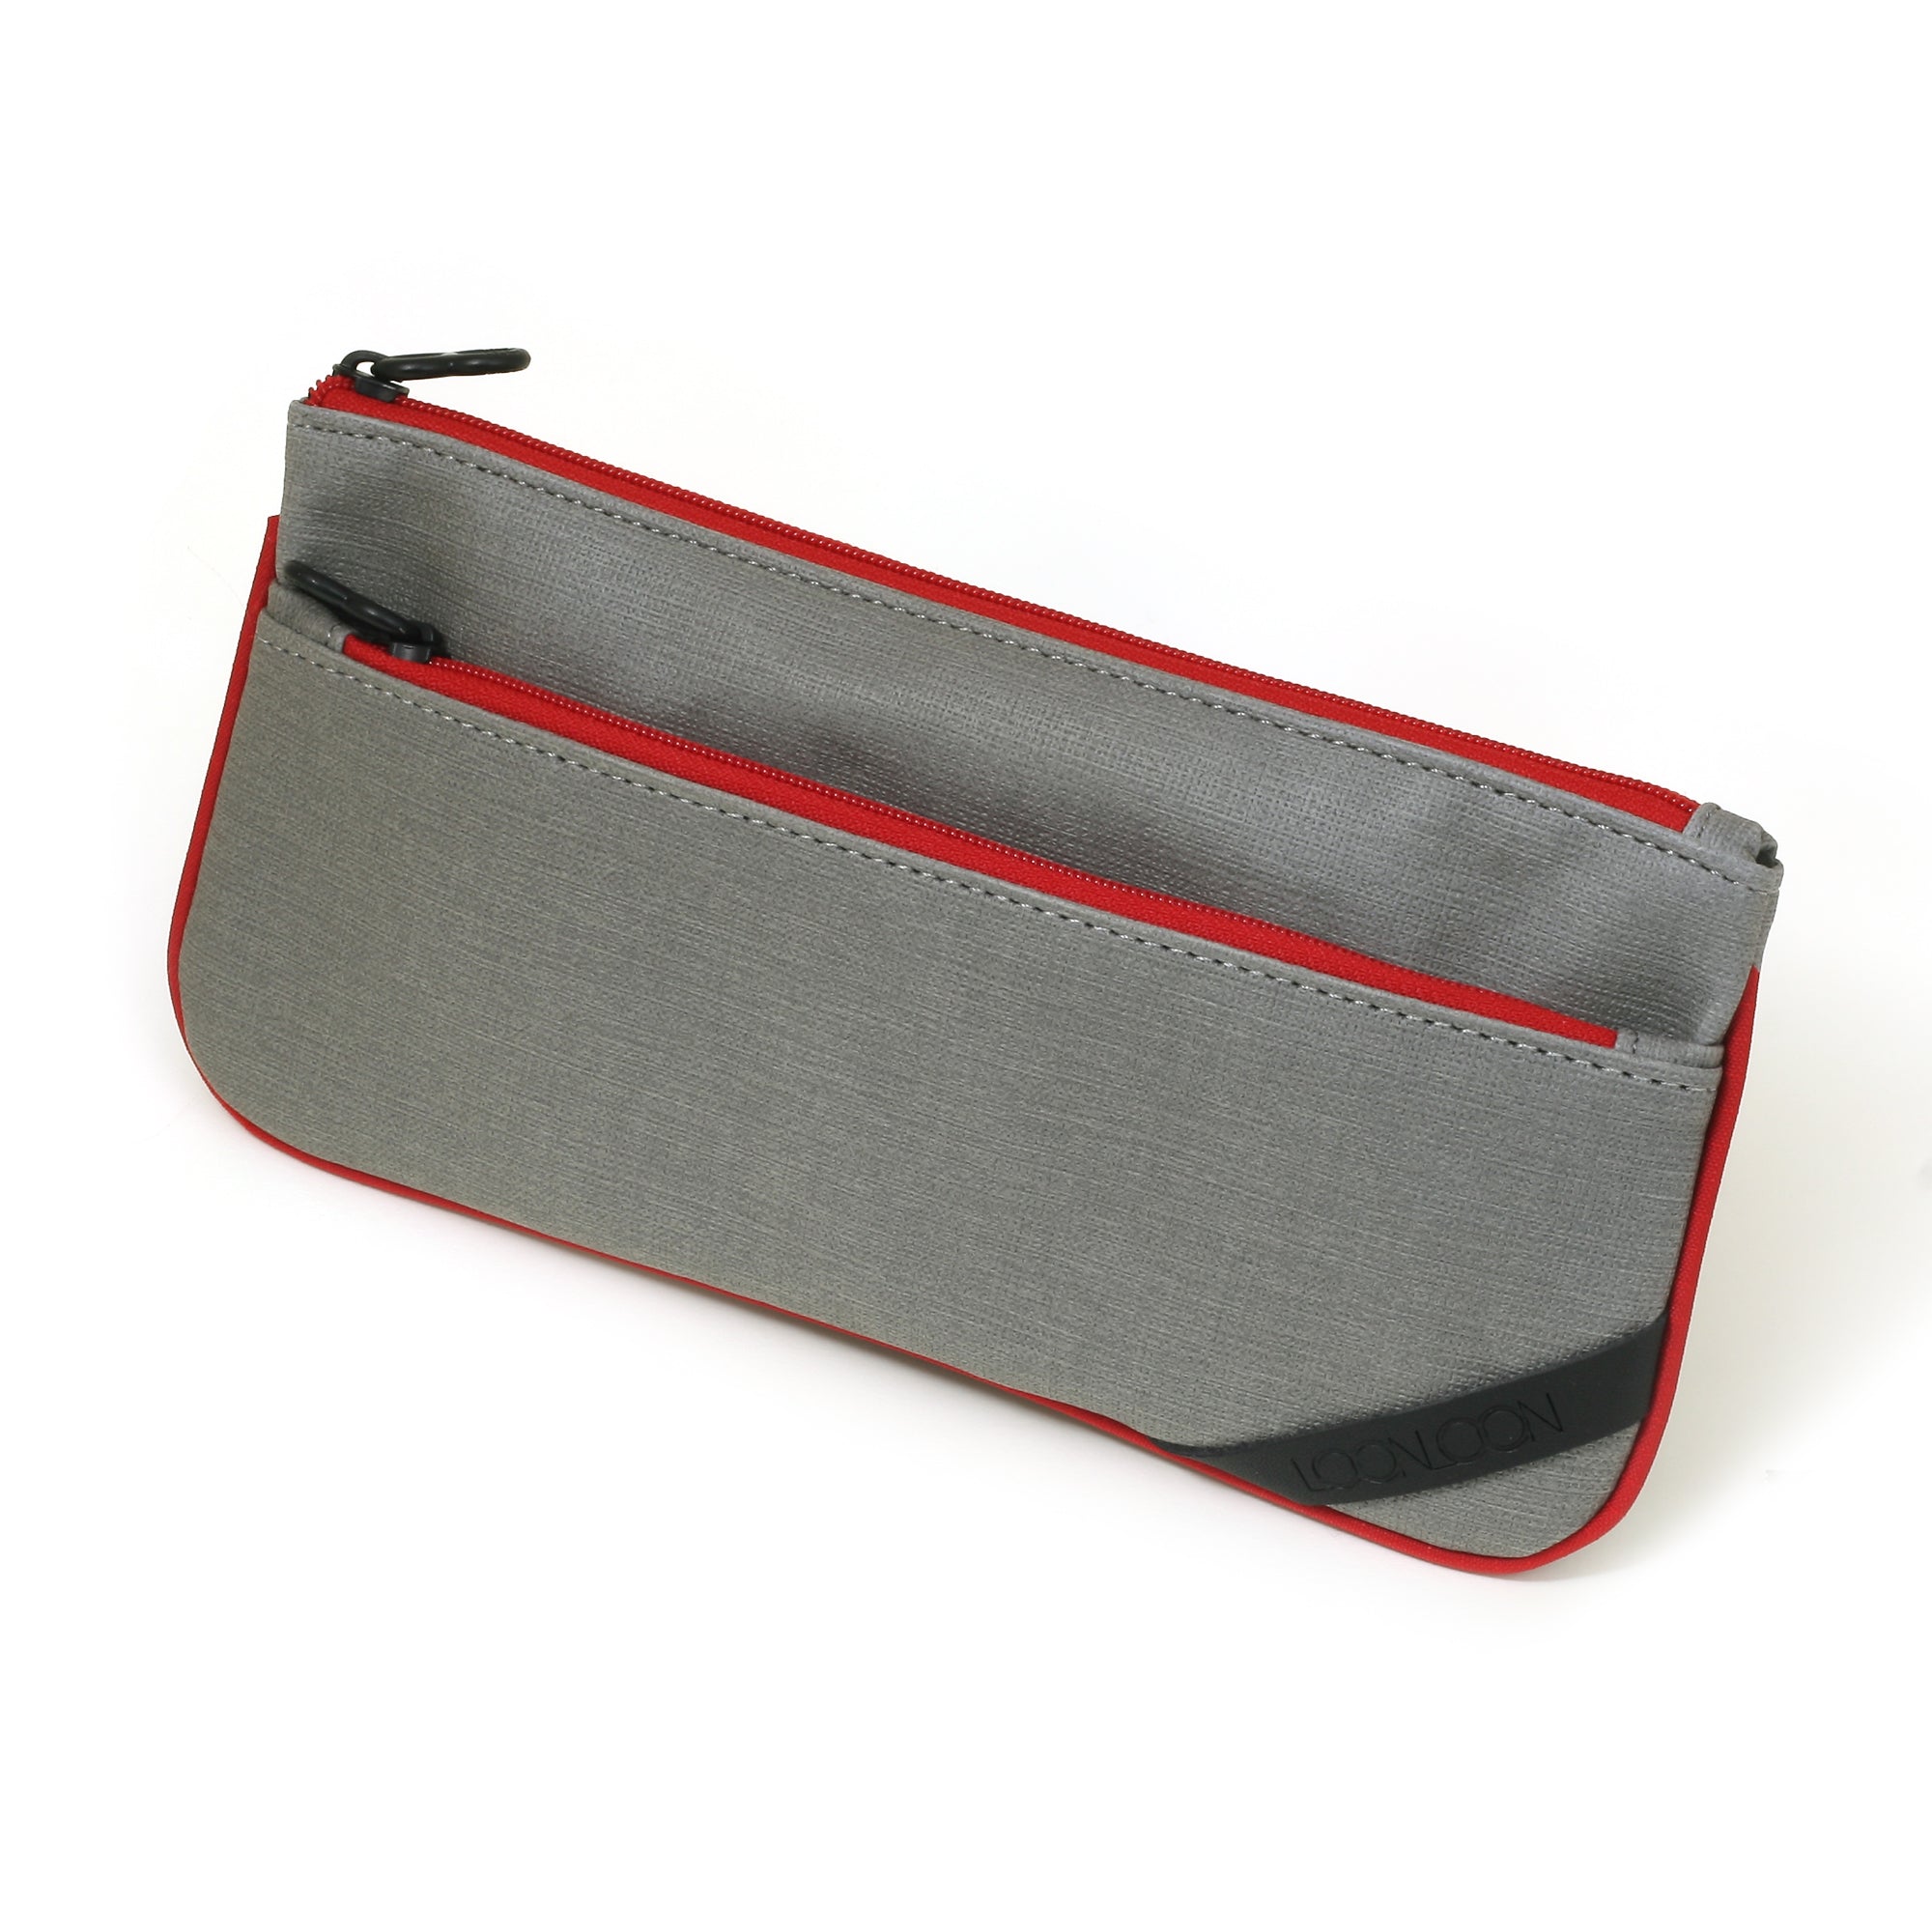 LOONLOON｜Pouch 3 Case